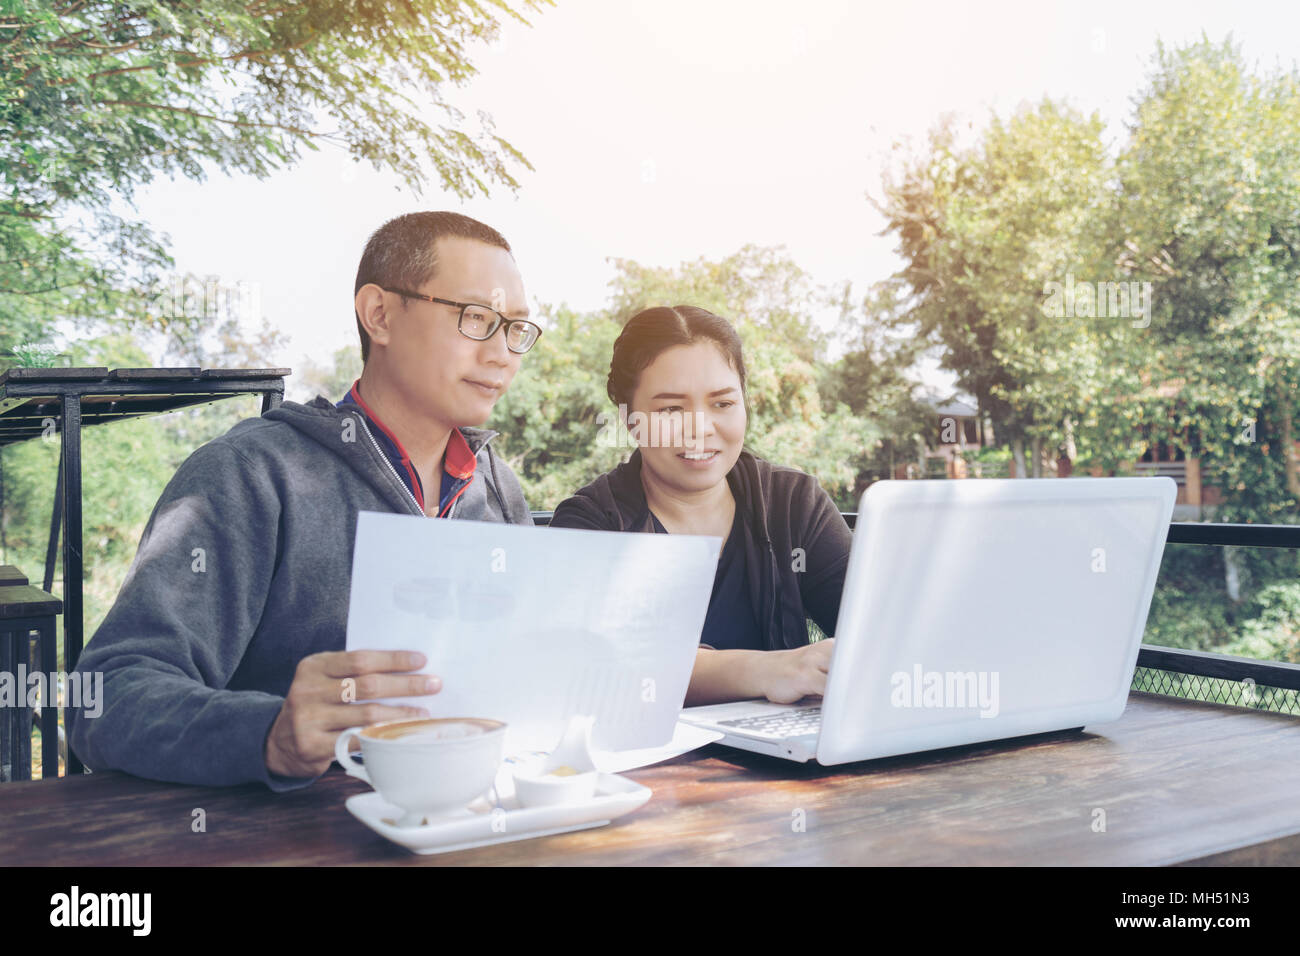 Asia couples middle age freelance holding business chart working with laptop at outdoor restaurant or cafe. Stock Photo